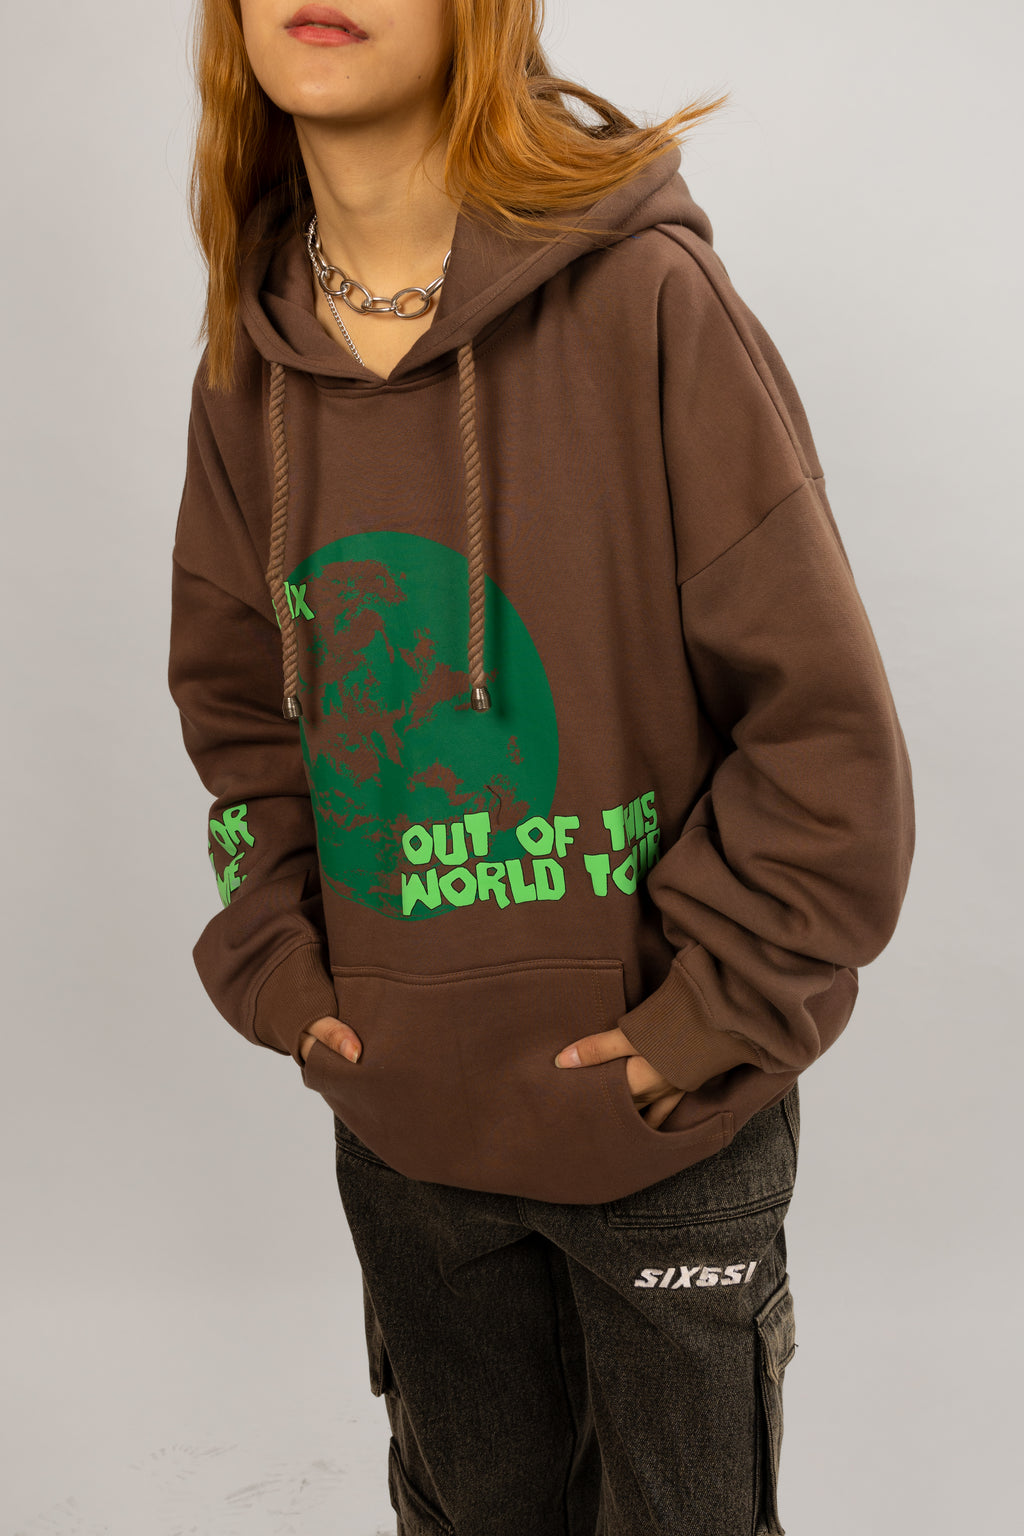 OTHER WORLDLY HOODIE